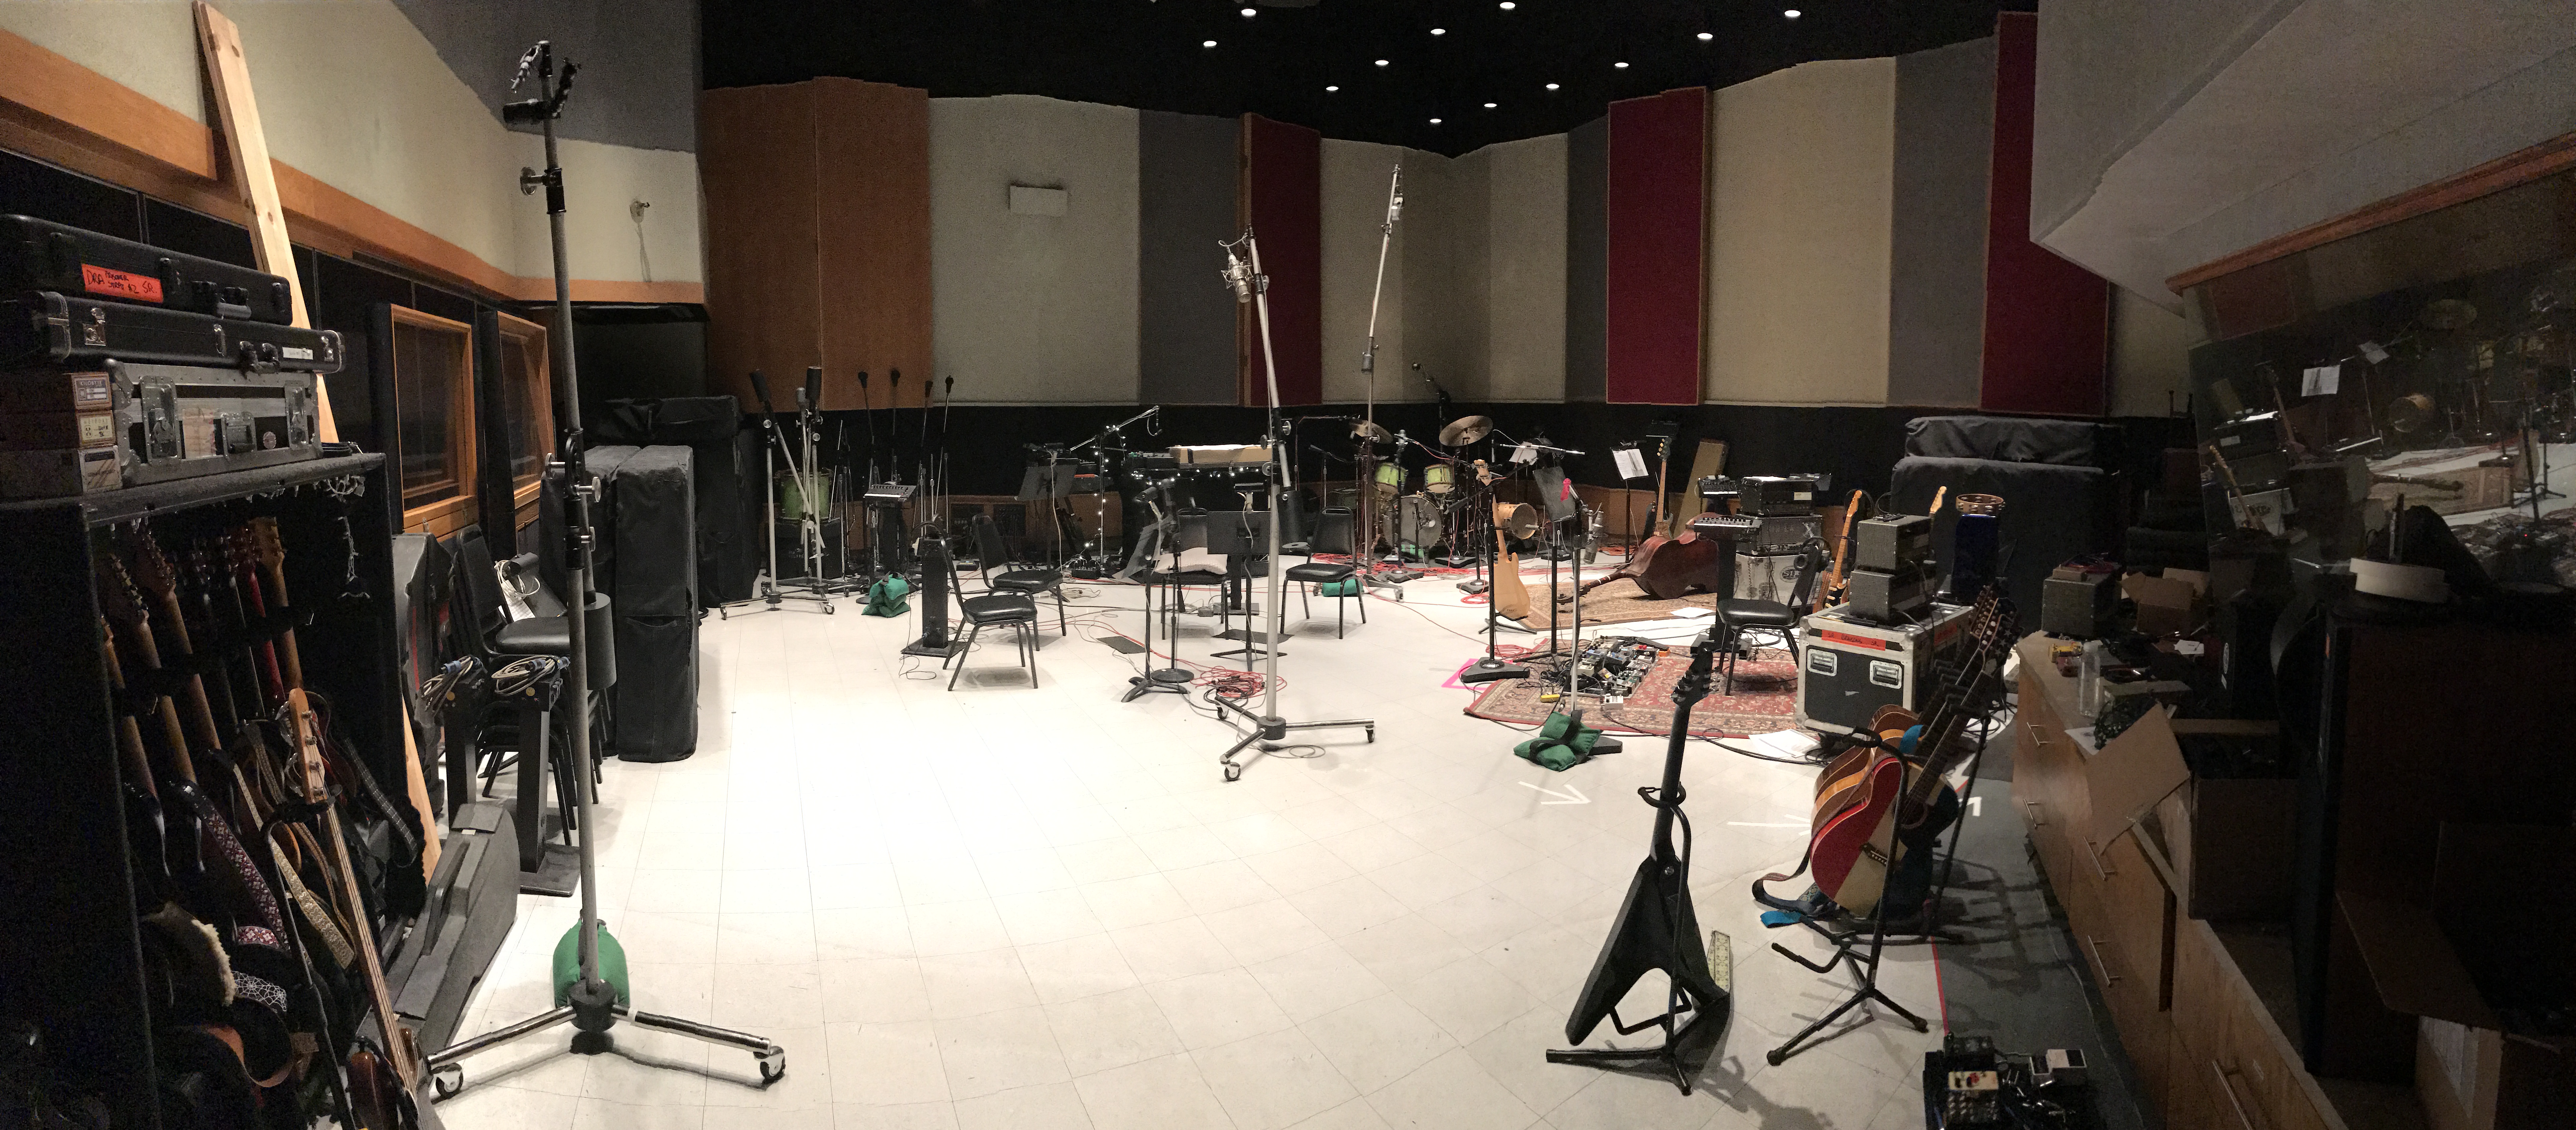 Capitol Studio B layout for the Ryan Adams-produced sessions, as seen from Lewis’ piano iso booth: Keltner’s drums are set up in the far right corner, Was’ basses to his left, Adams’ guitars to Was’ left, and Tench’s rigs to Keltner’s right, against back wall.